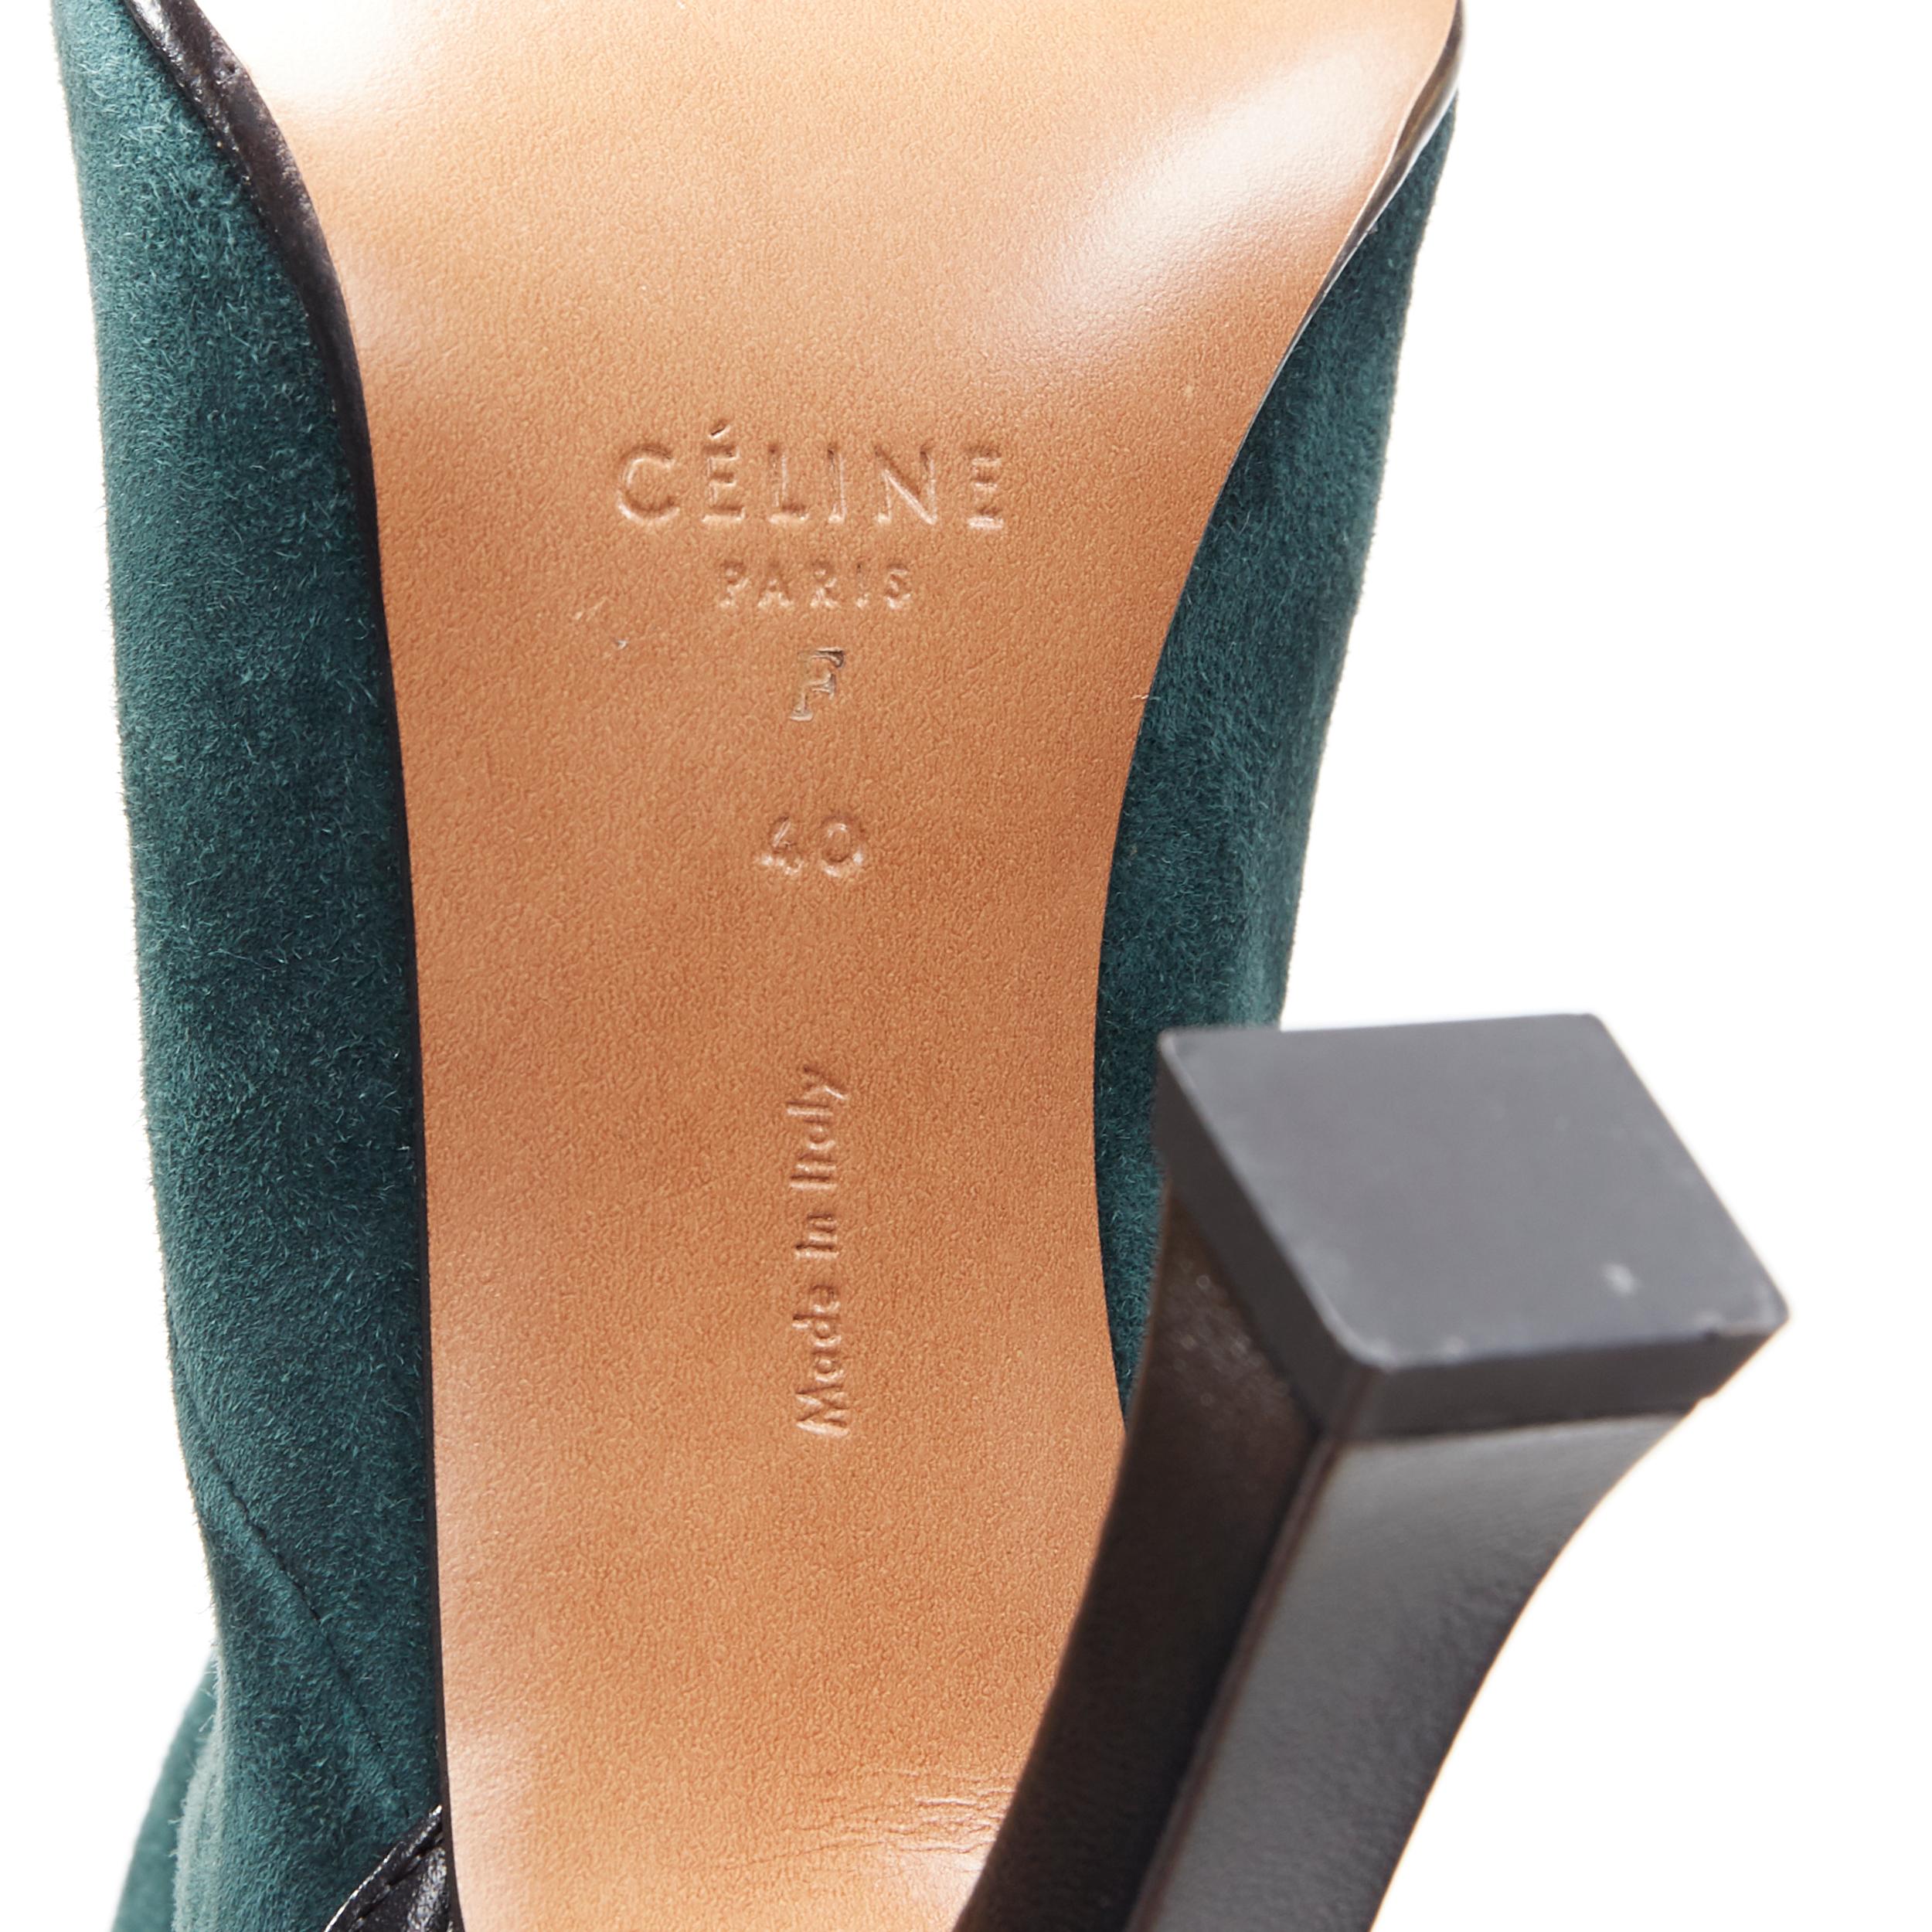 new OLD CELINE Madame Flare forest green stretch suede square toe bootie EU40 3